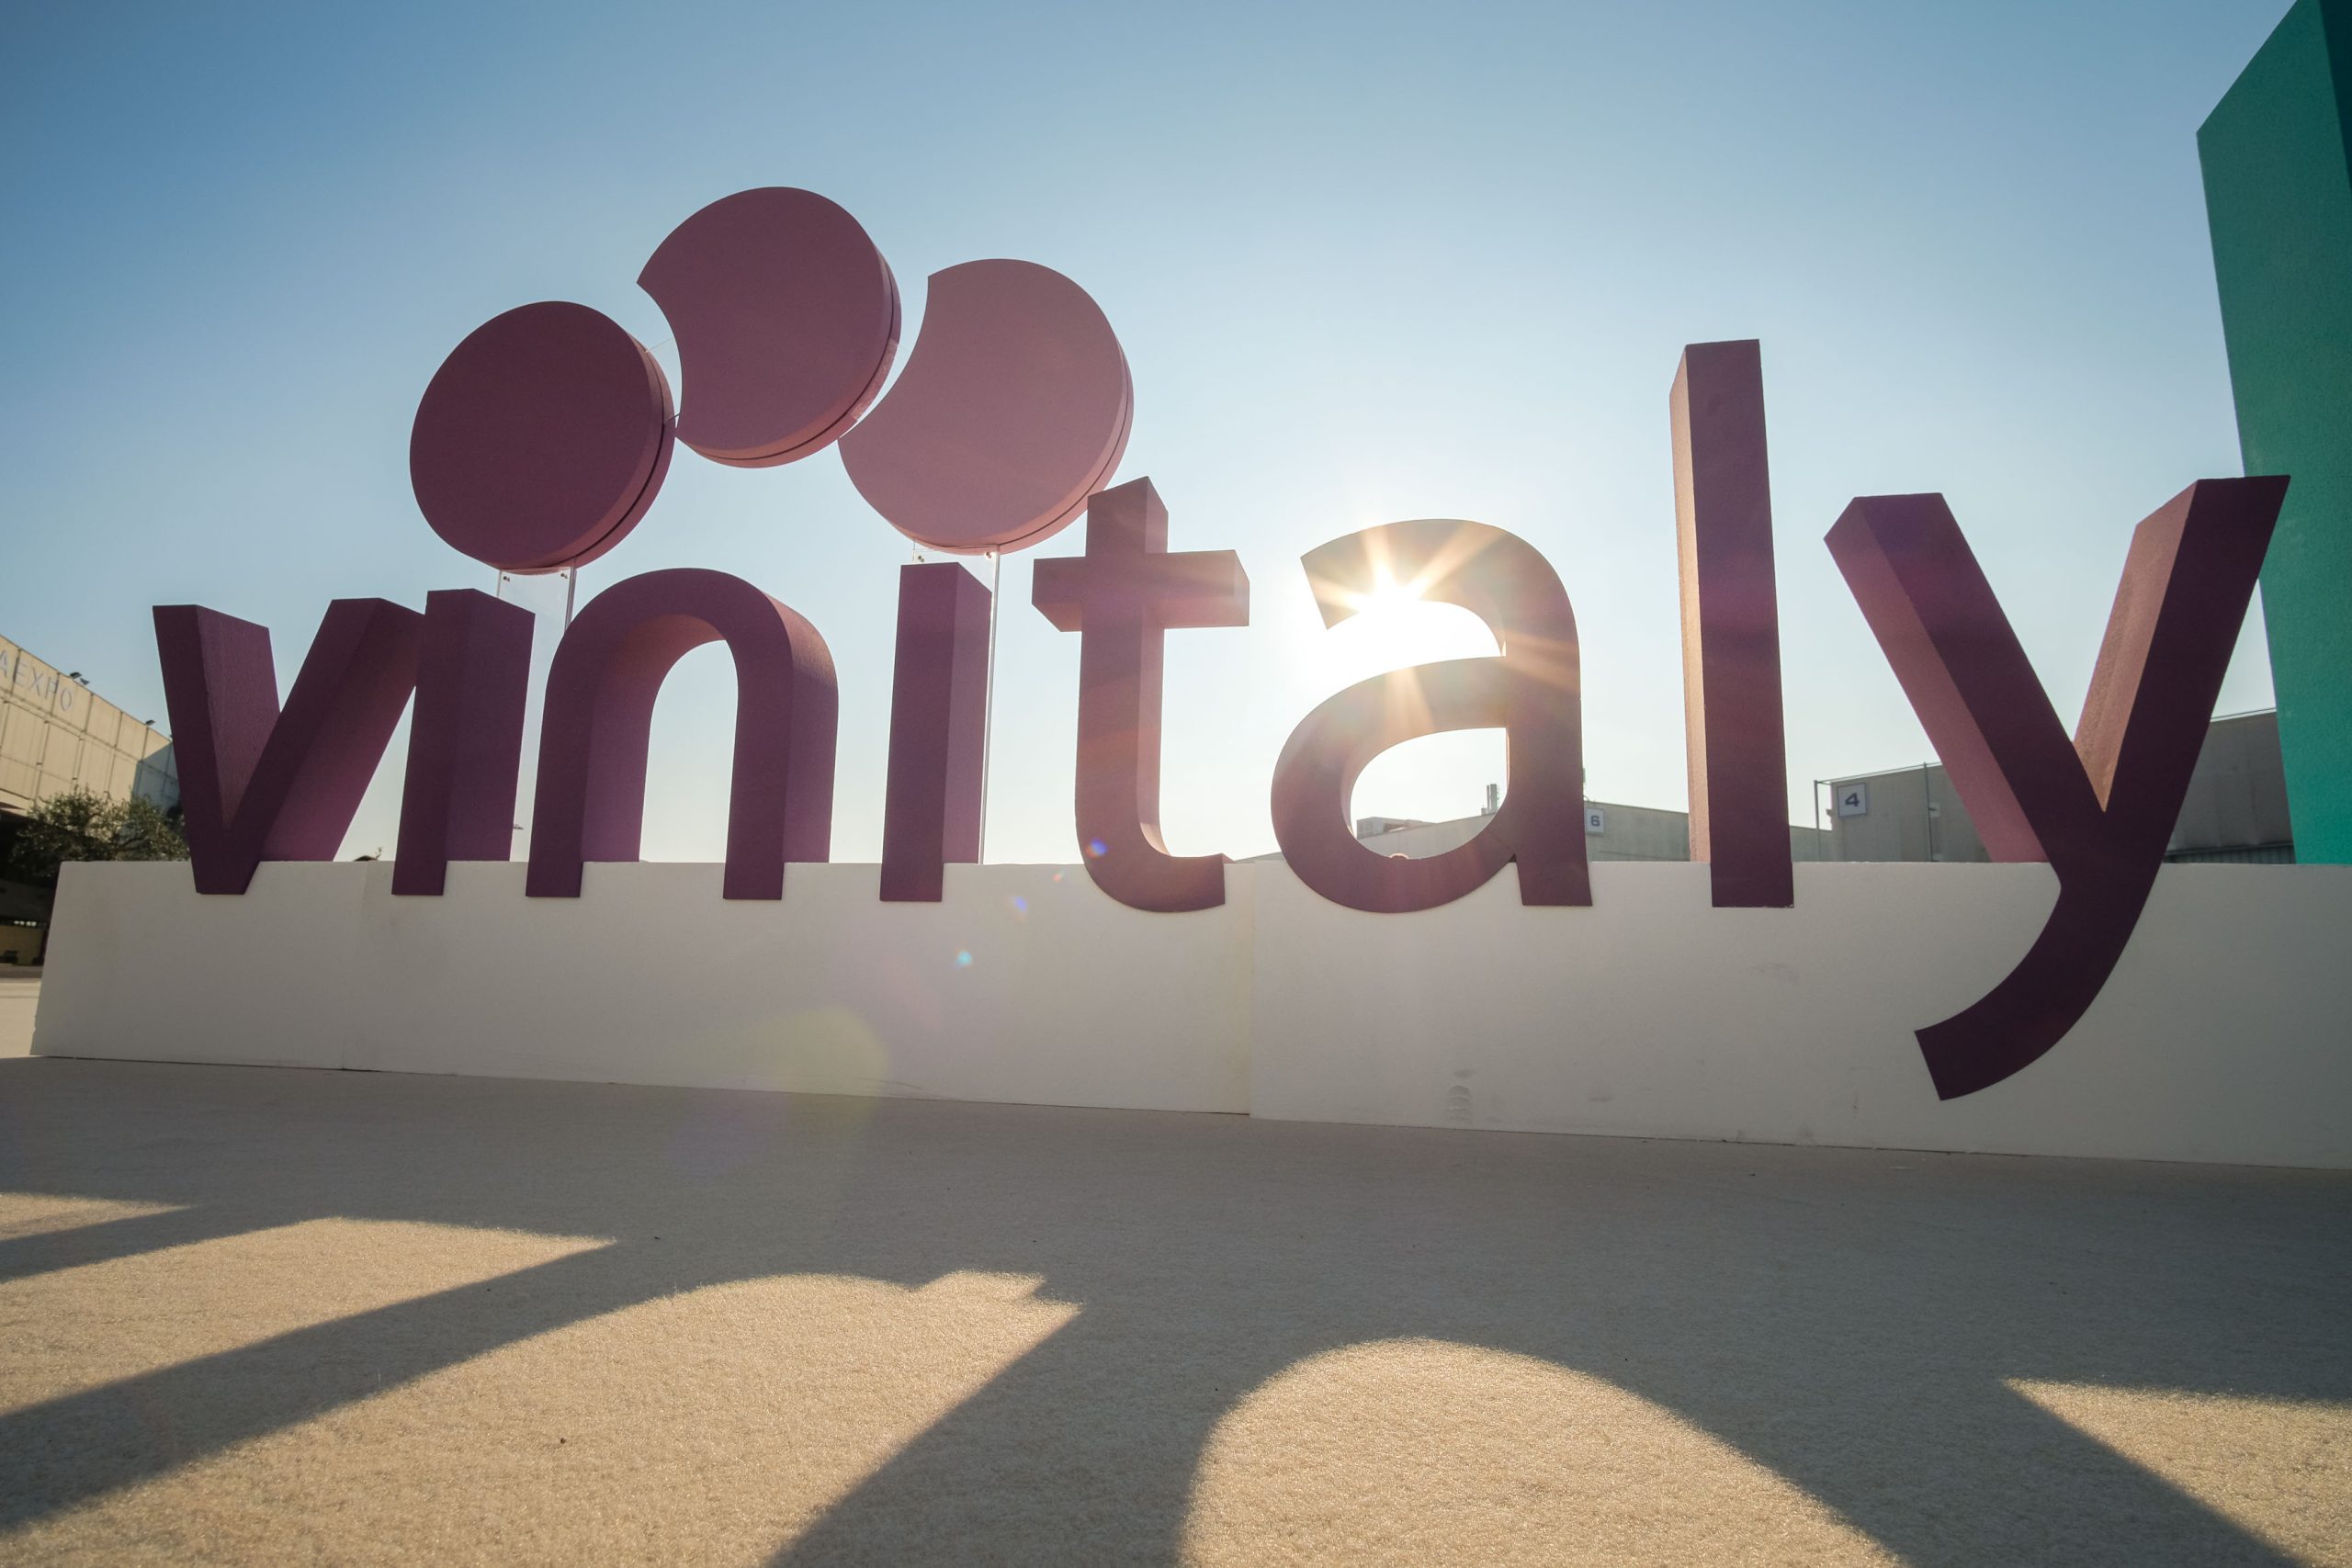 Vinitaly 2022 towards a “sold-out” event